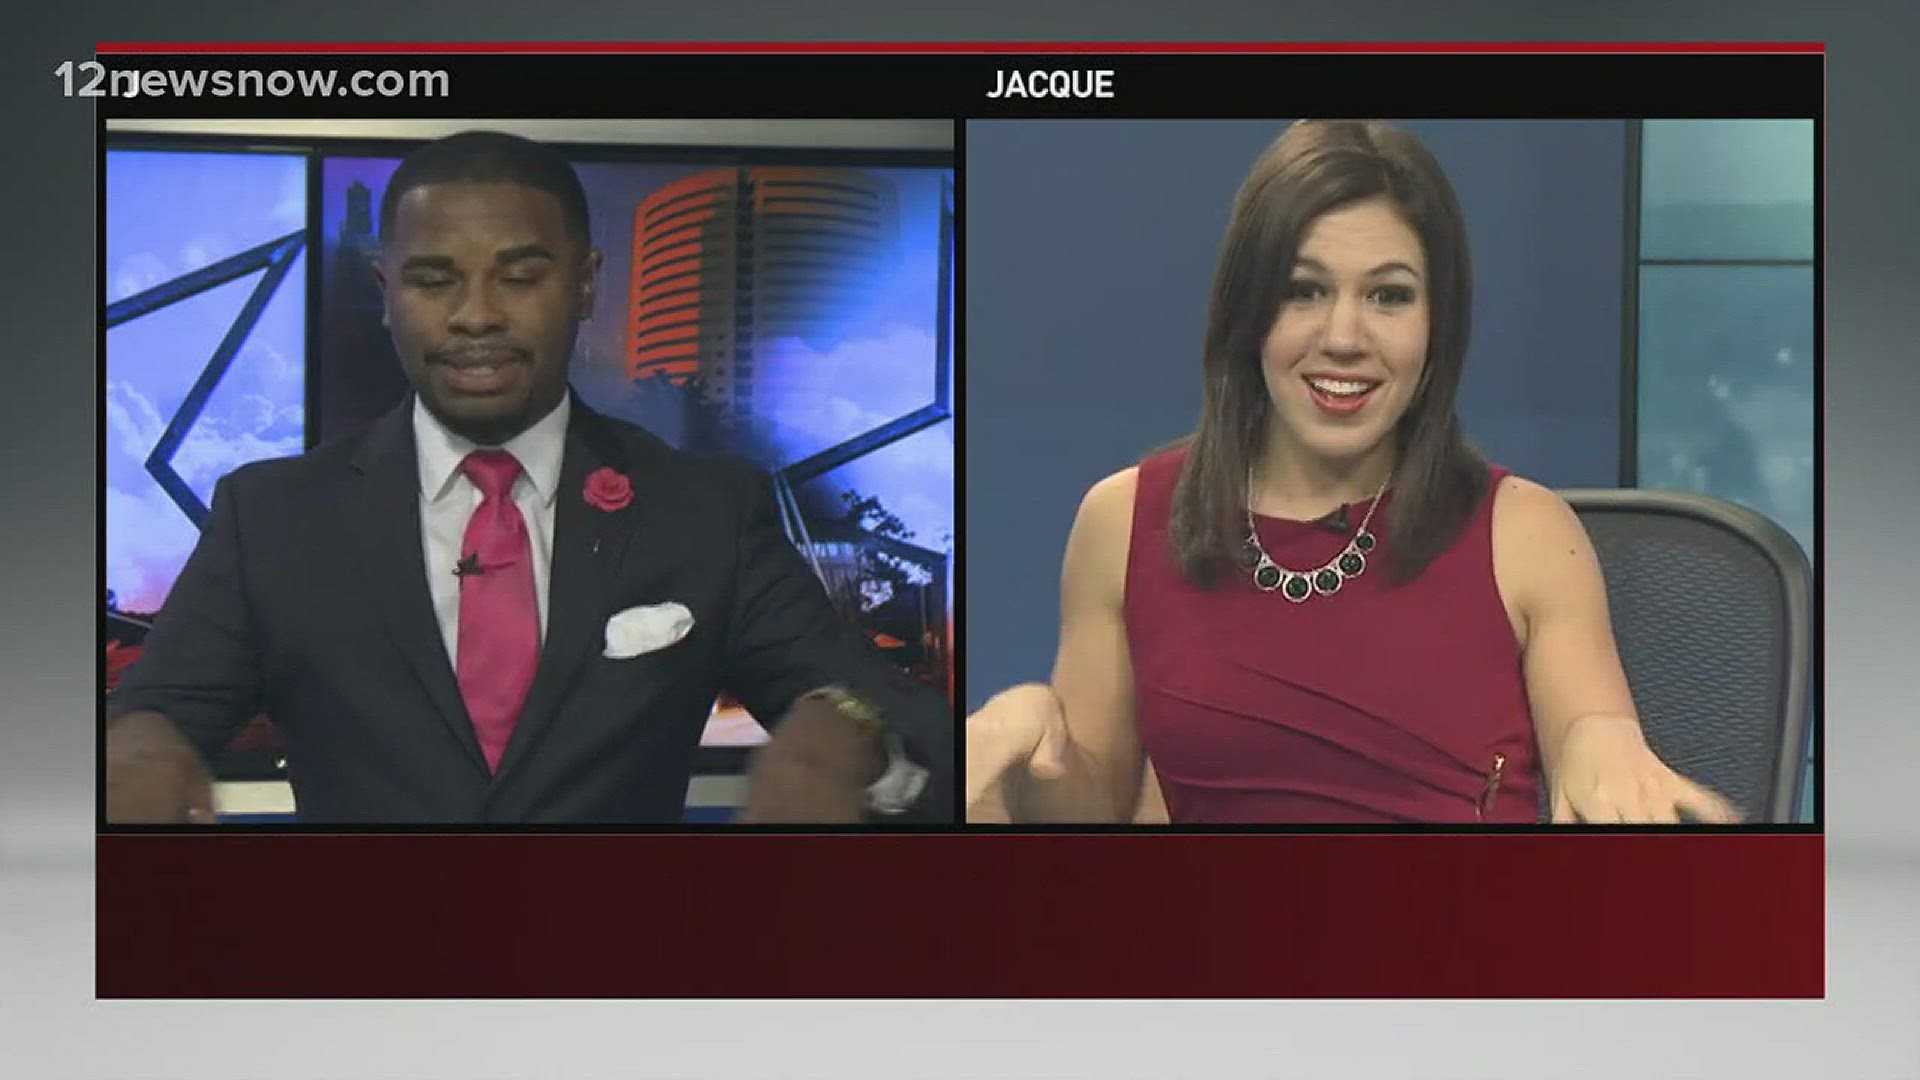 Who danced better? Weekend anchor Jacque Masse or Sports anchor J. Russel?